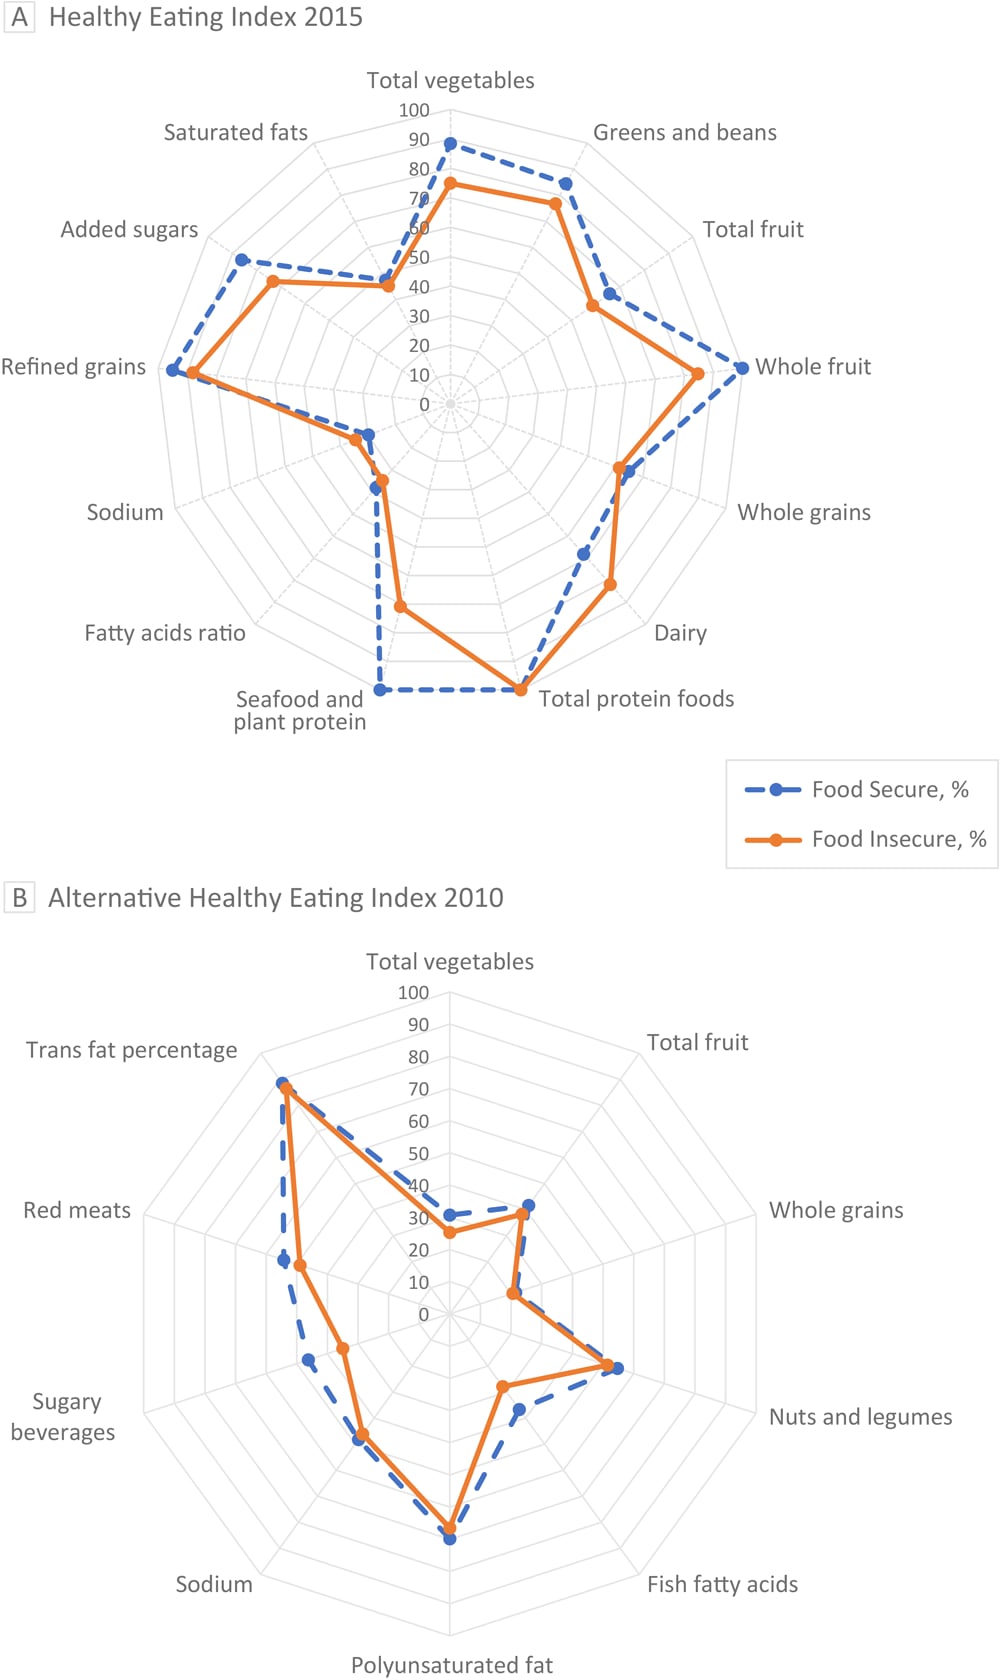 Radar plots of Healthy Eating Index (HEI) 2015 and Alternative Healthy Eating Index (AHEI) 2010 food components for both food secure and food insecure early childhood education providers. The radial axes represent median scores for food components graphed as percentages of each component’s total maximum score. The radar plots’ outer edges represent a maximum score of 100%26#37;, while the centers represent a minimum score of 0%26#37;. Plot A illustrates trends from HEI-2015. Total fruit represents all forms of fruit, including fruit juice; whole fruit represents all forms of fruit except fruit juice. Plot B illustrates trends from AHEI-2010. The median score for food secure was 53.1. For food insecure, the median score was 49.4. A higher score indicates a higher diet quality. Sugary beverages are any beverage with natural or added sugar.